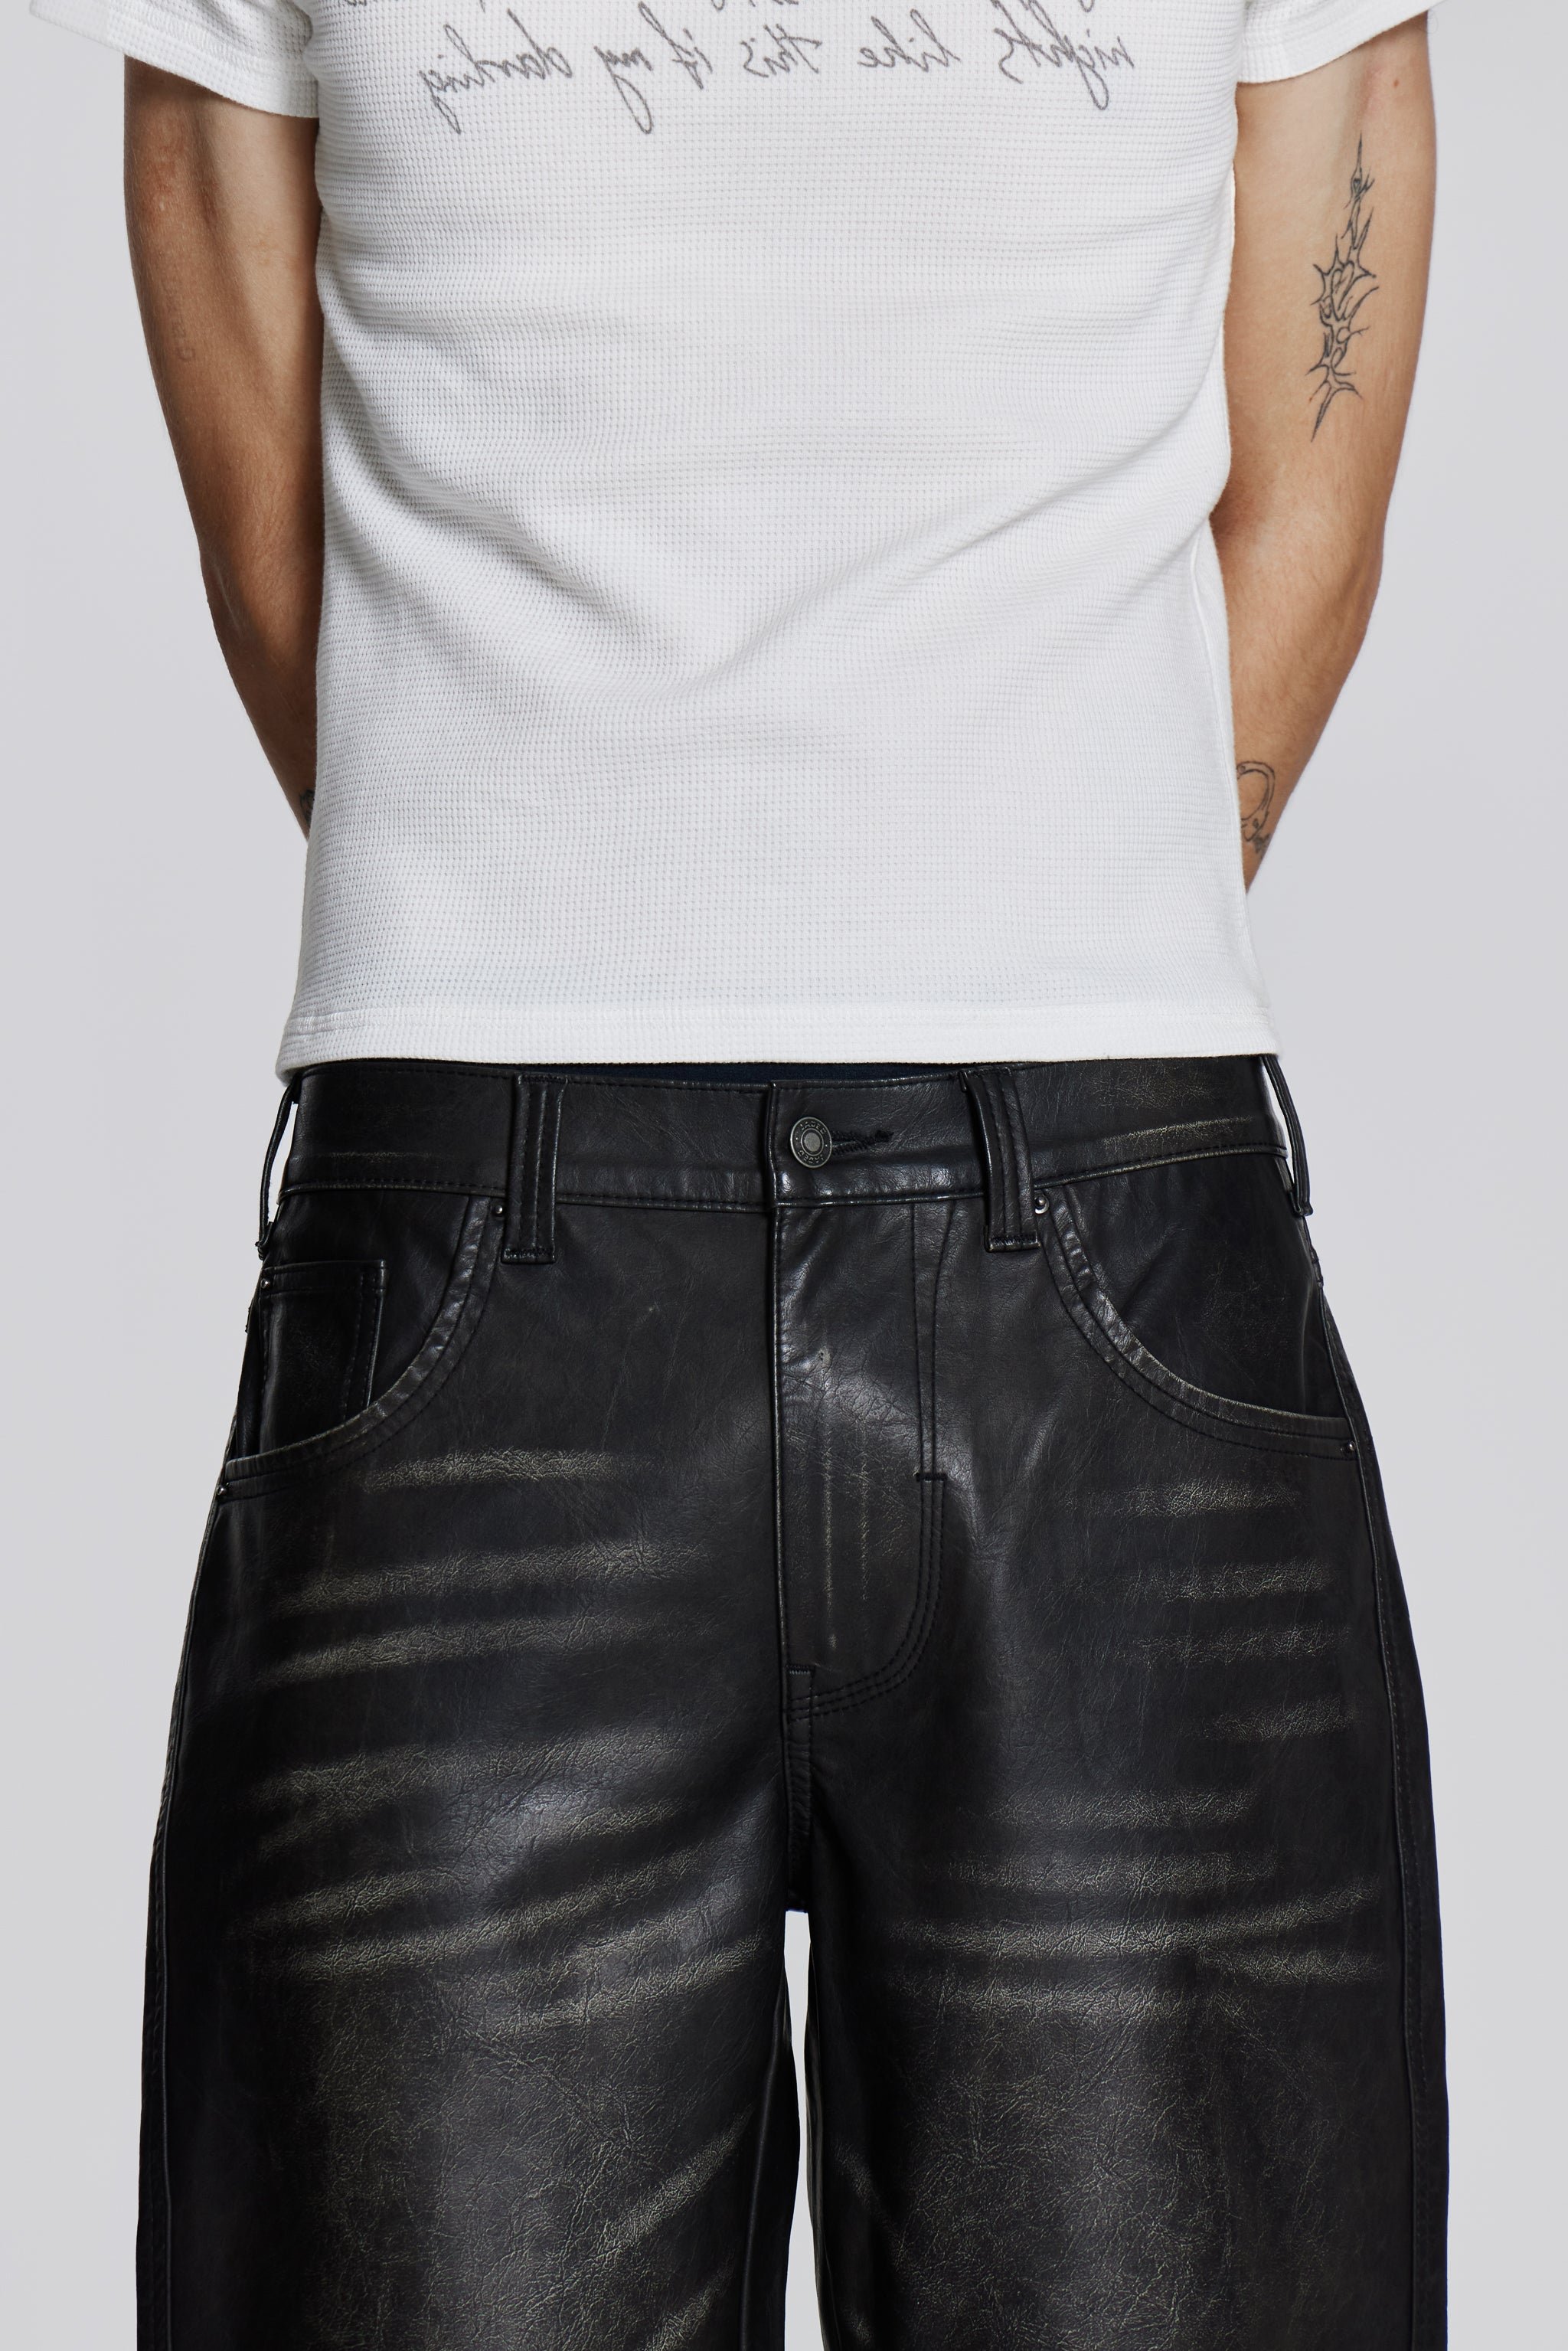 Buy London Rag Stone Faux Leather High Waist Skinny Trousers Online